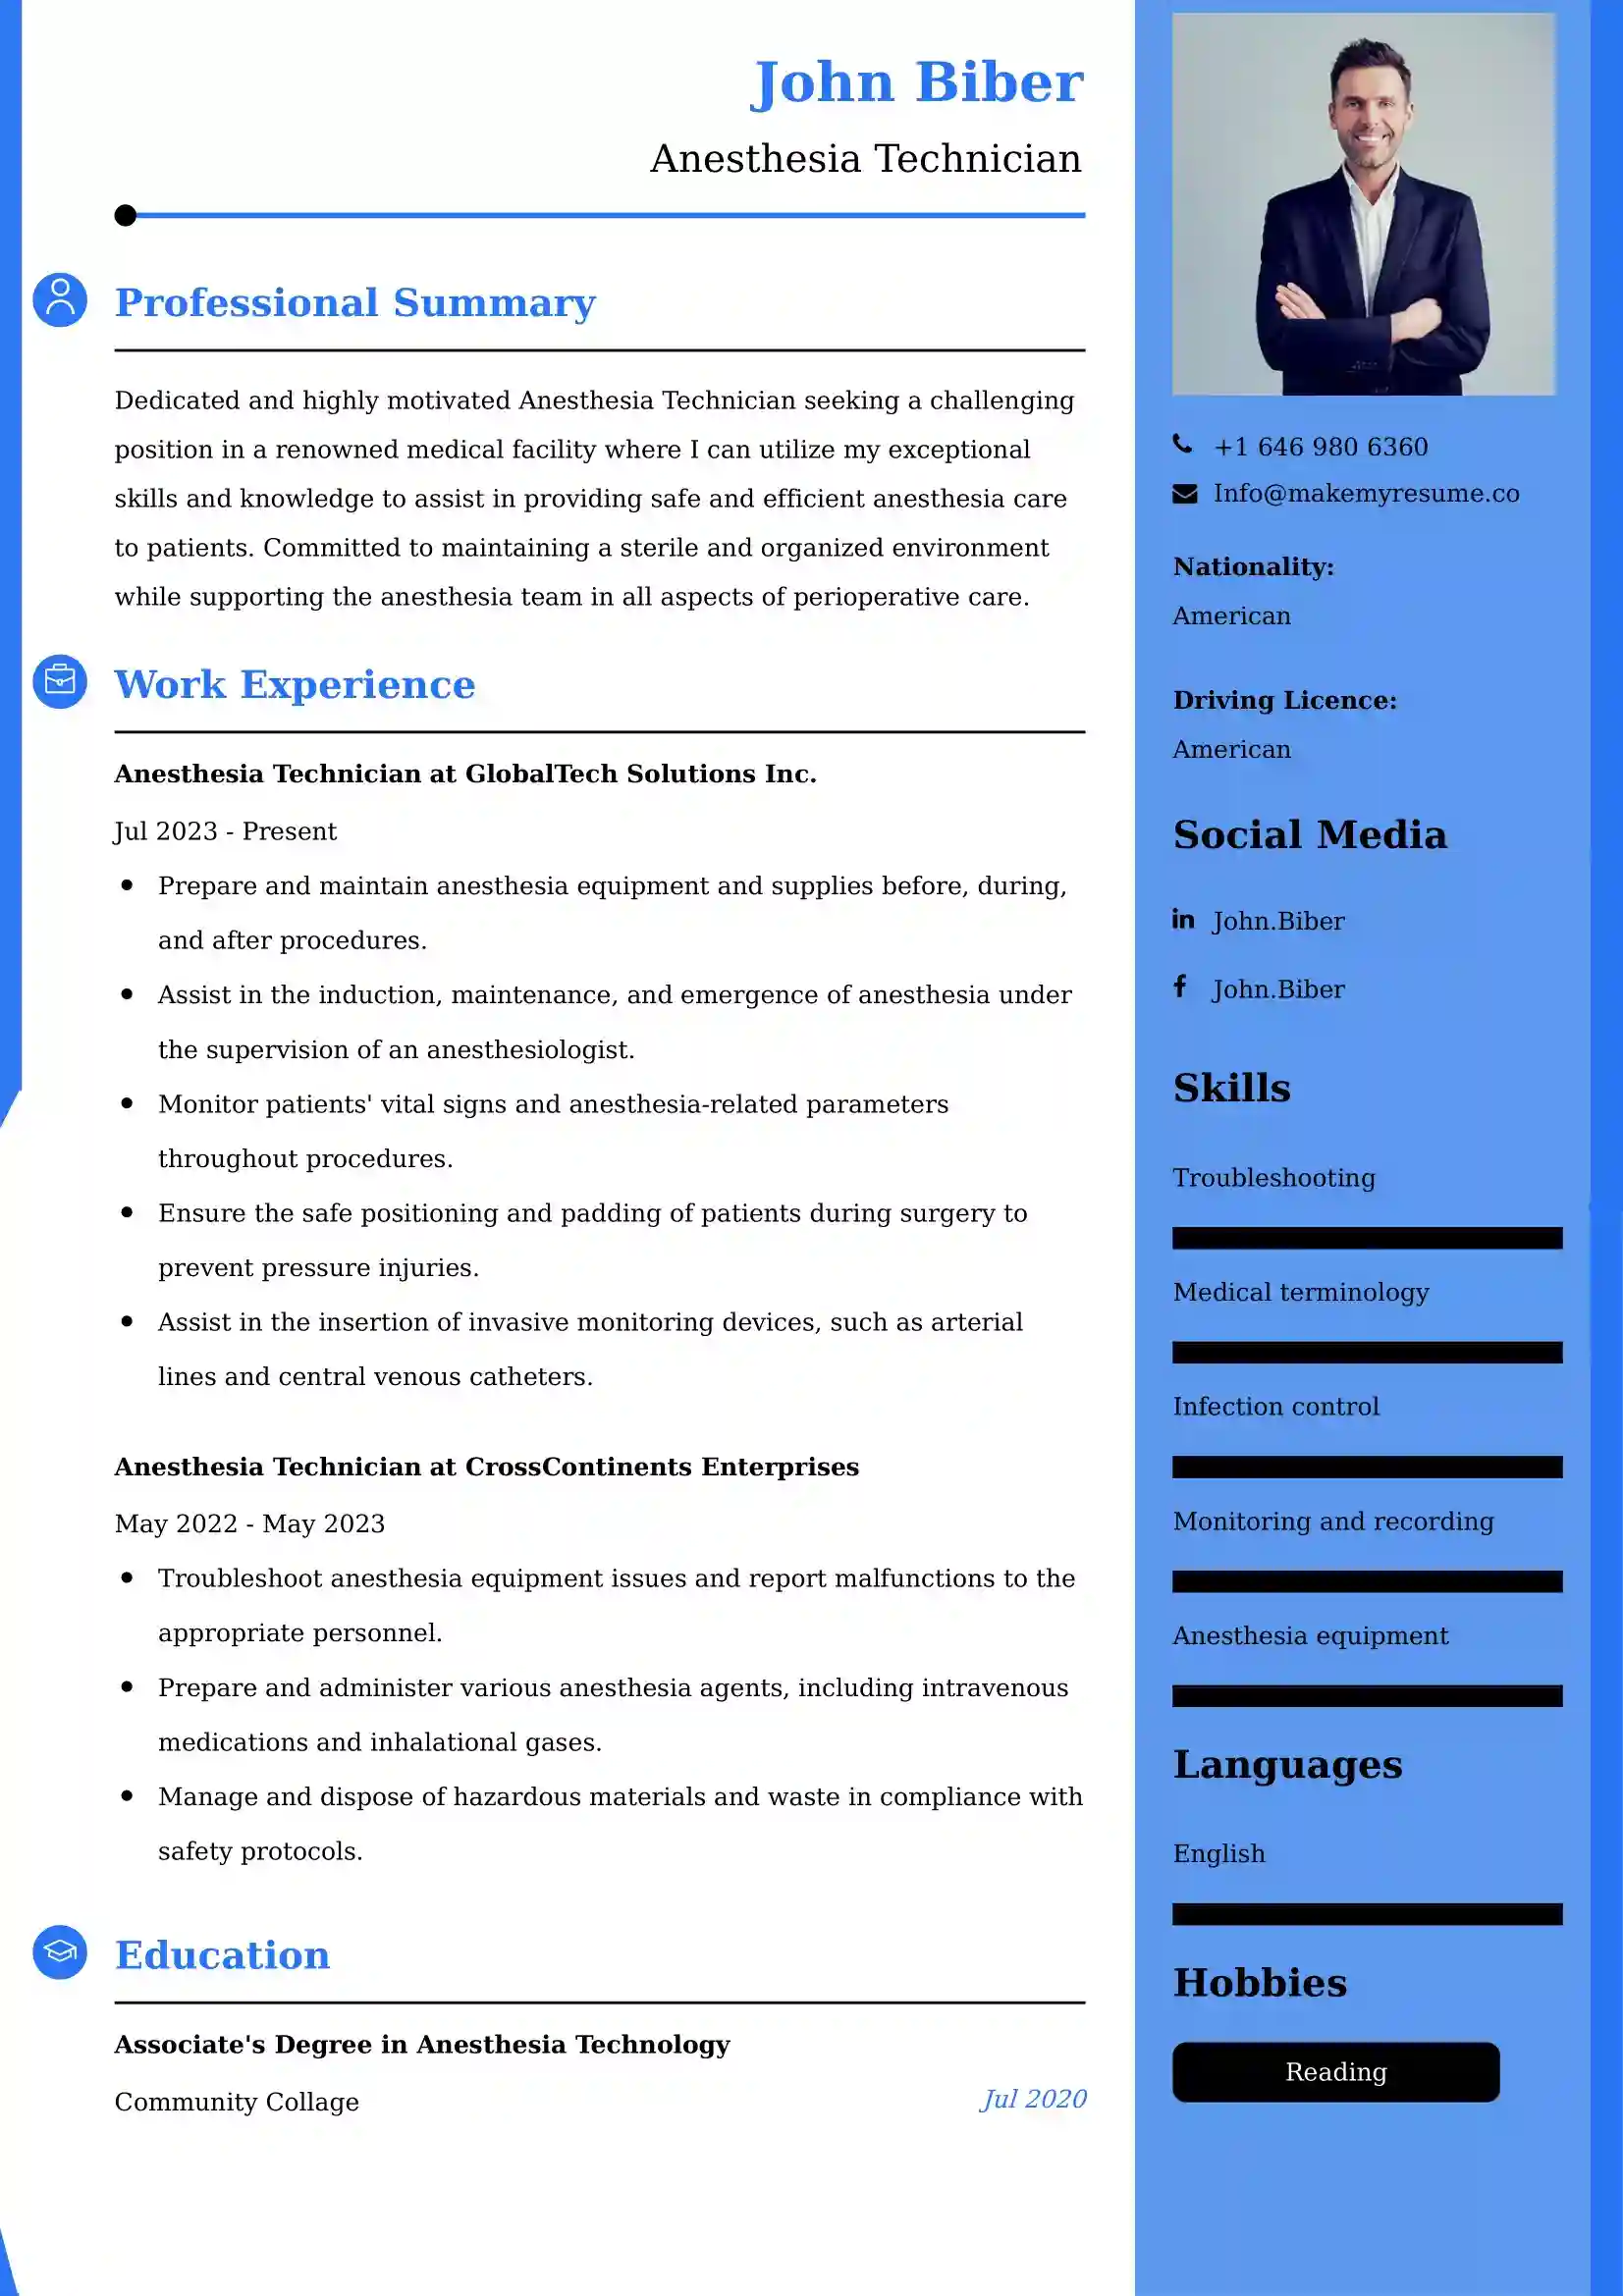 Best Anesthesia Technician Resume Examples for UAE